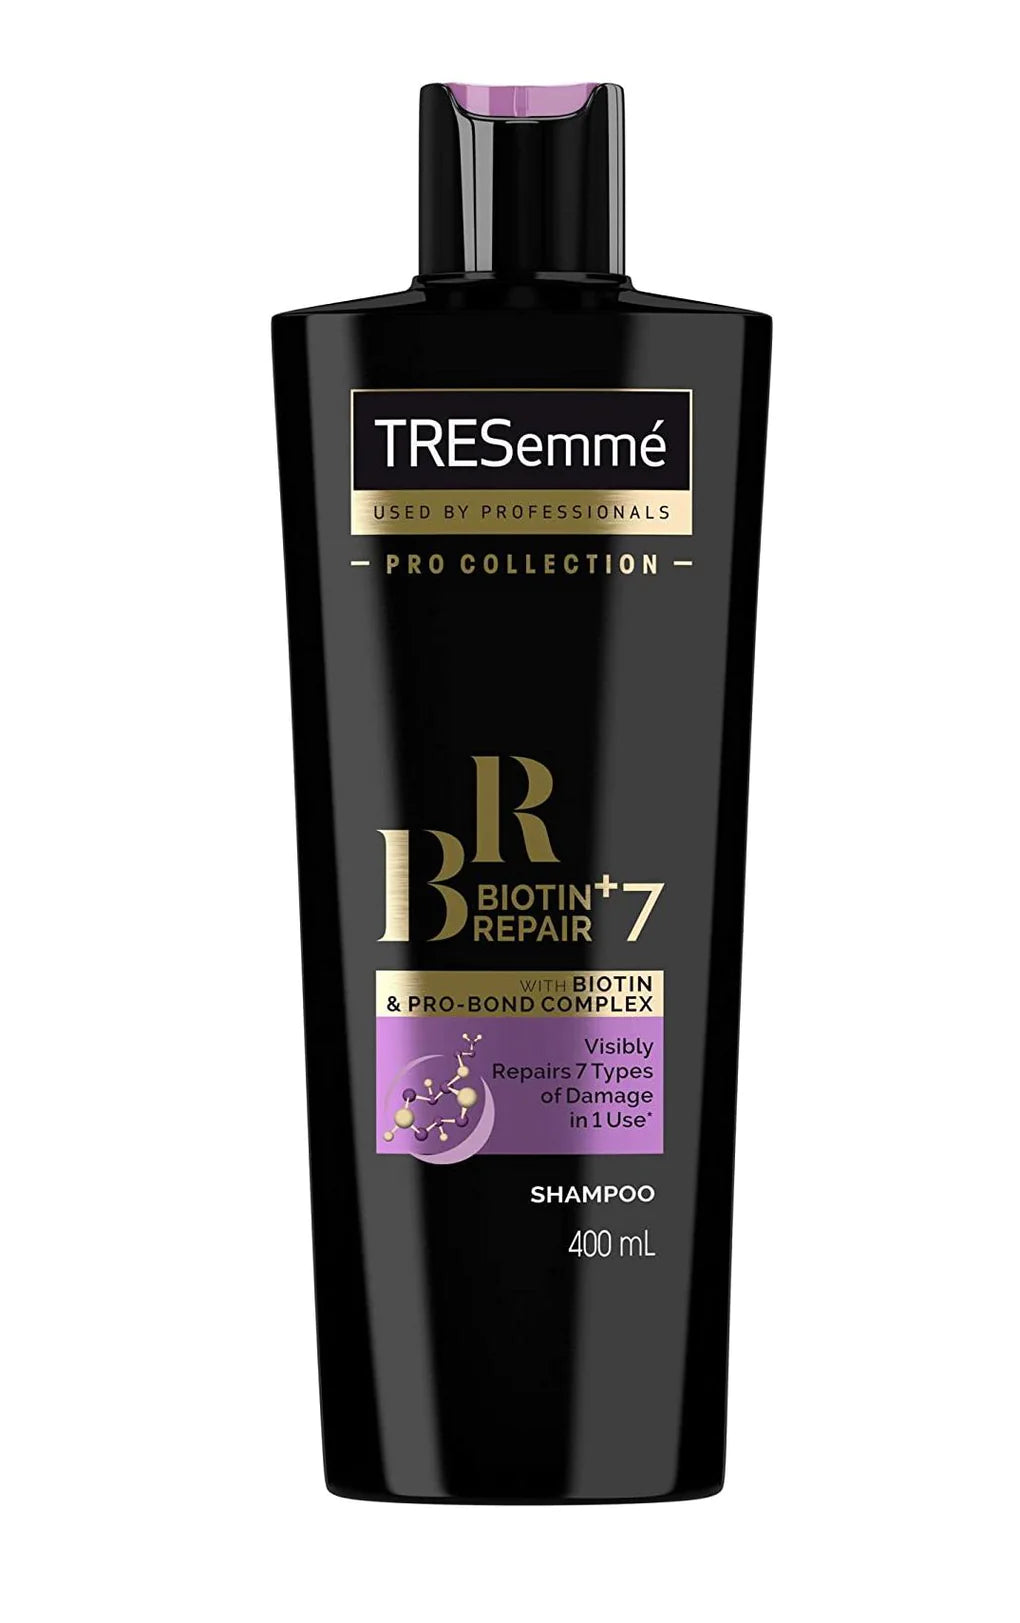 Tresemme Pro Collection Shampoo 400ml